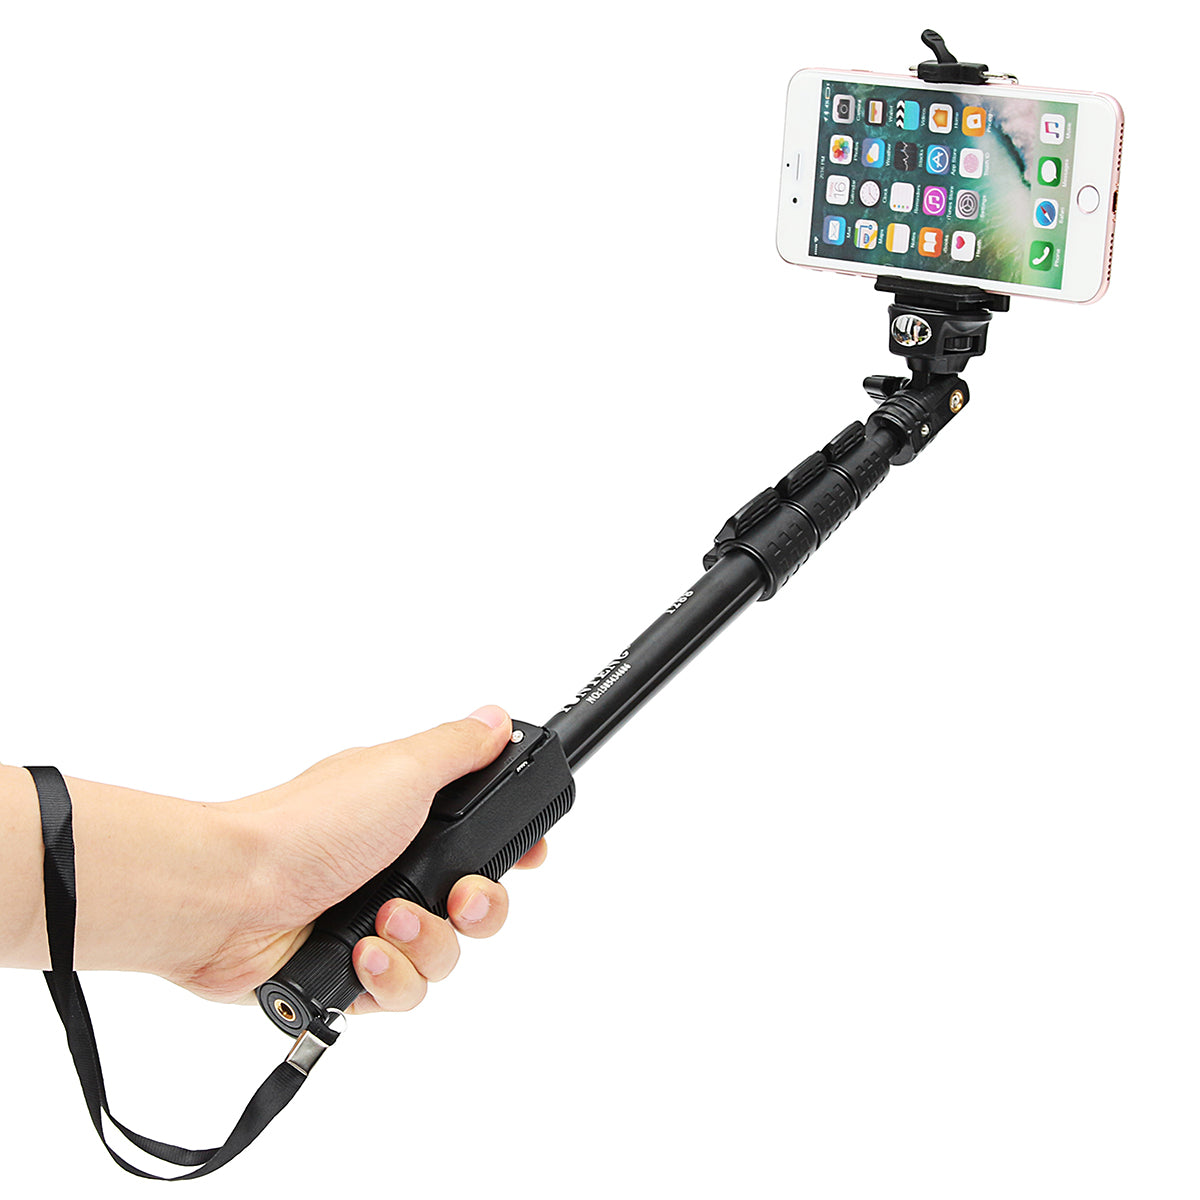 YT-1288 Extendable bluetooth Remote Control Mirror Selfie Stick Monopod for Cell Phone Gopro Camera